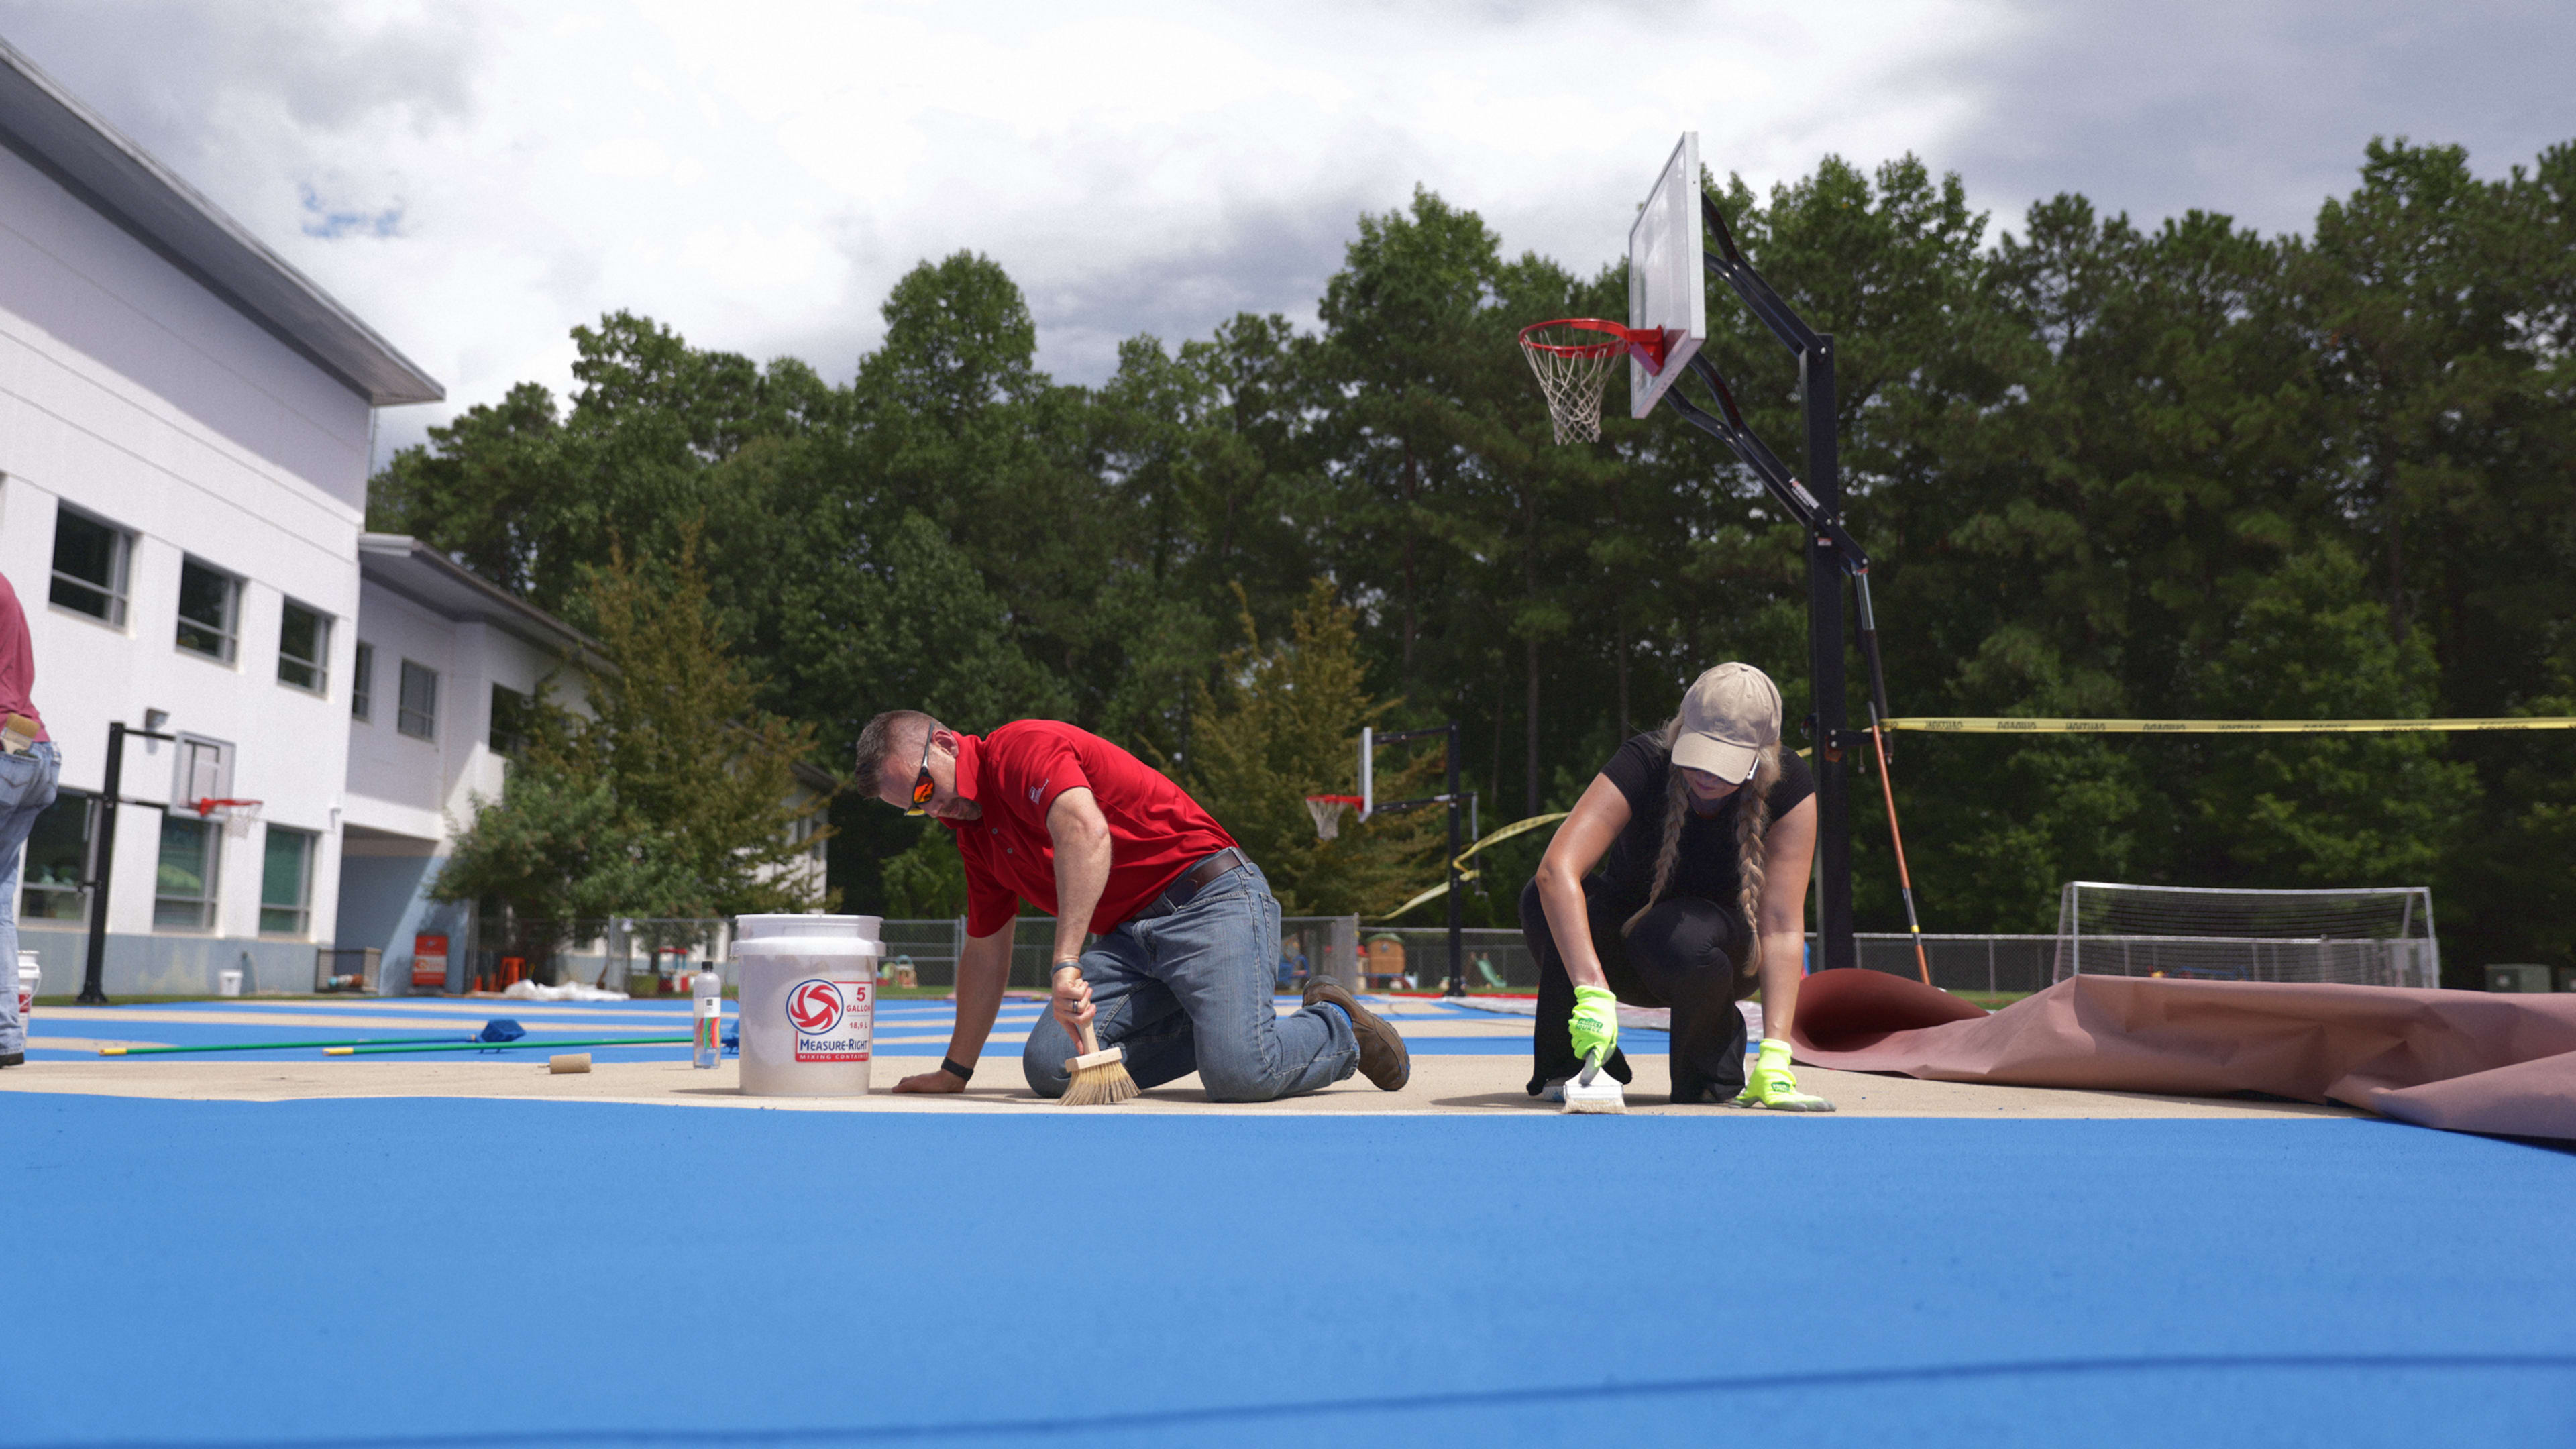 Thanks to an innovative new paint, this school’s playground just got 12 degrees cooler